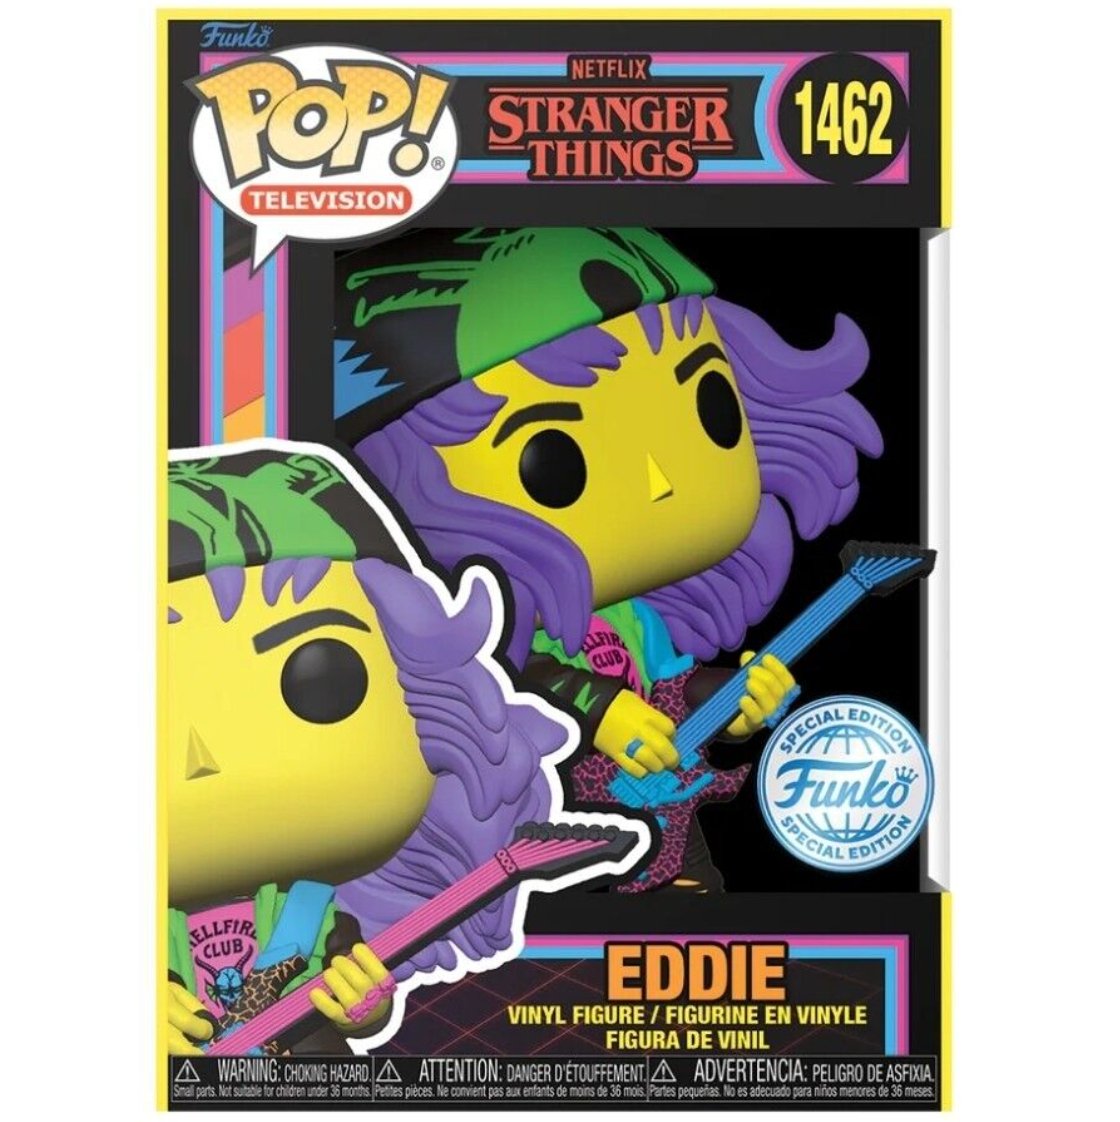 Stranger Things - Eddie [with Guitar] [Blacklight] (Special Edition) #1462 - Funko Pop! Vinyl Television - Persona Toys